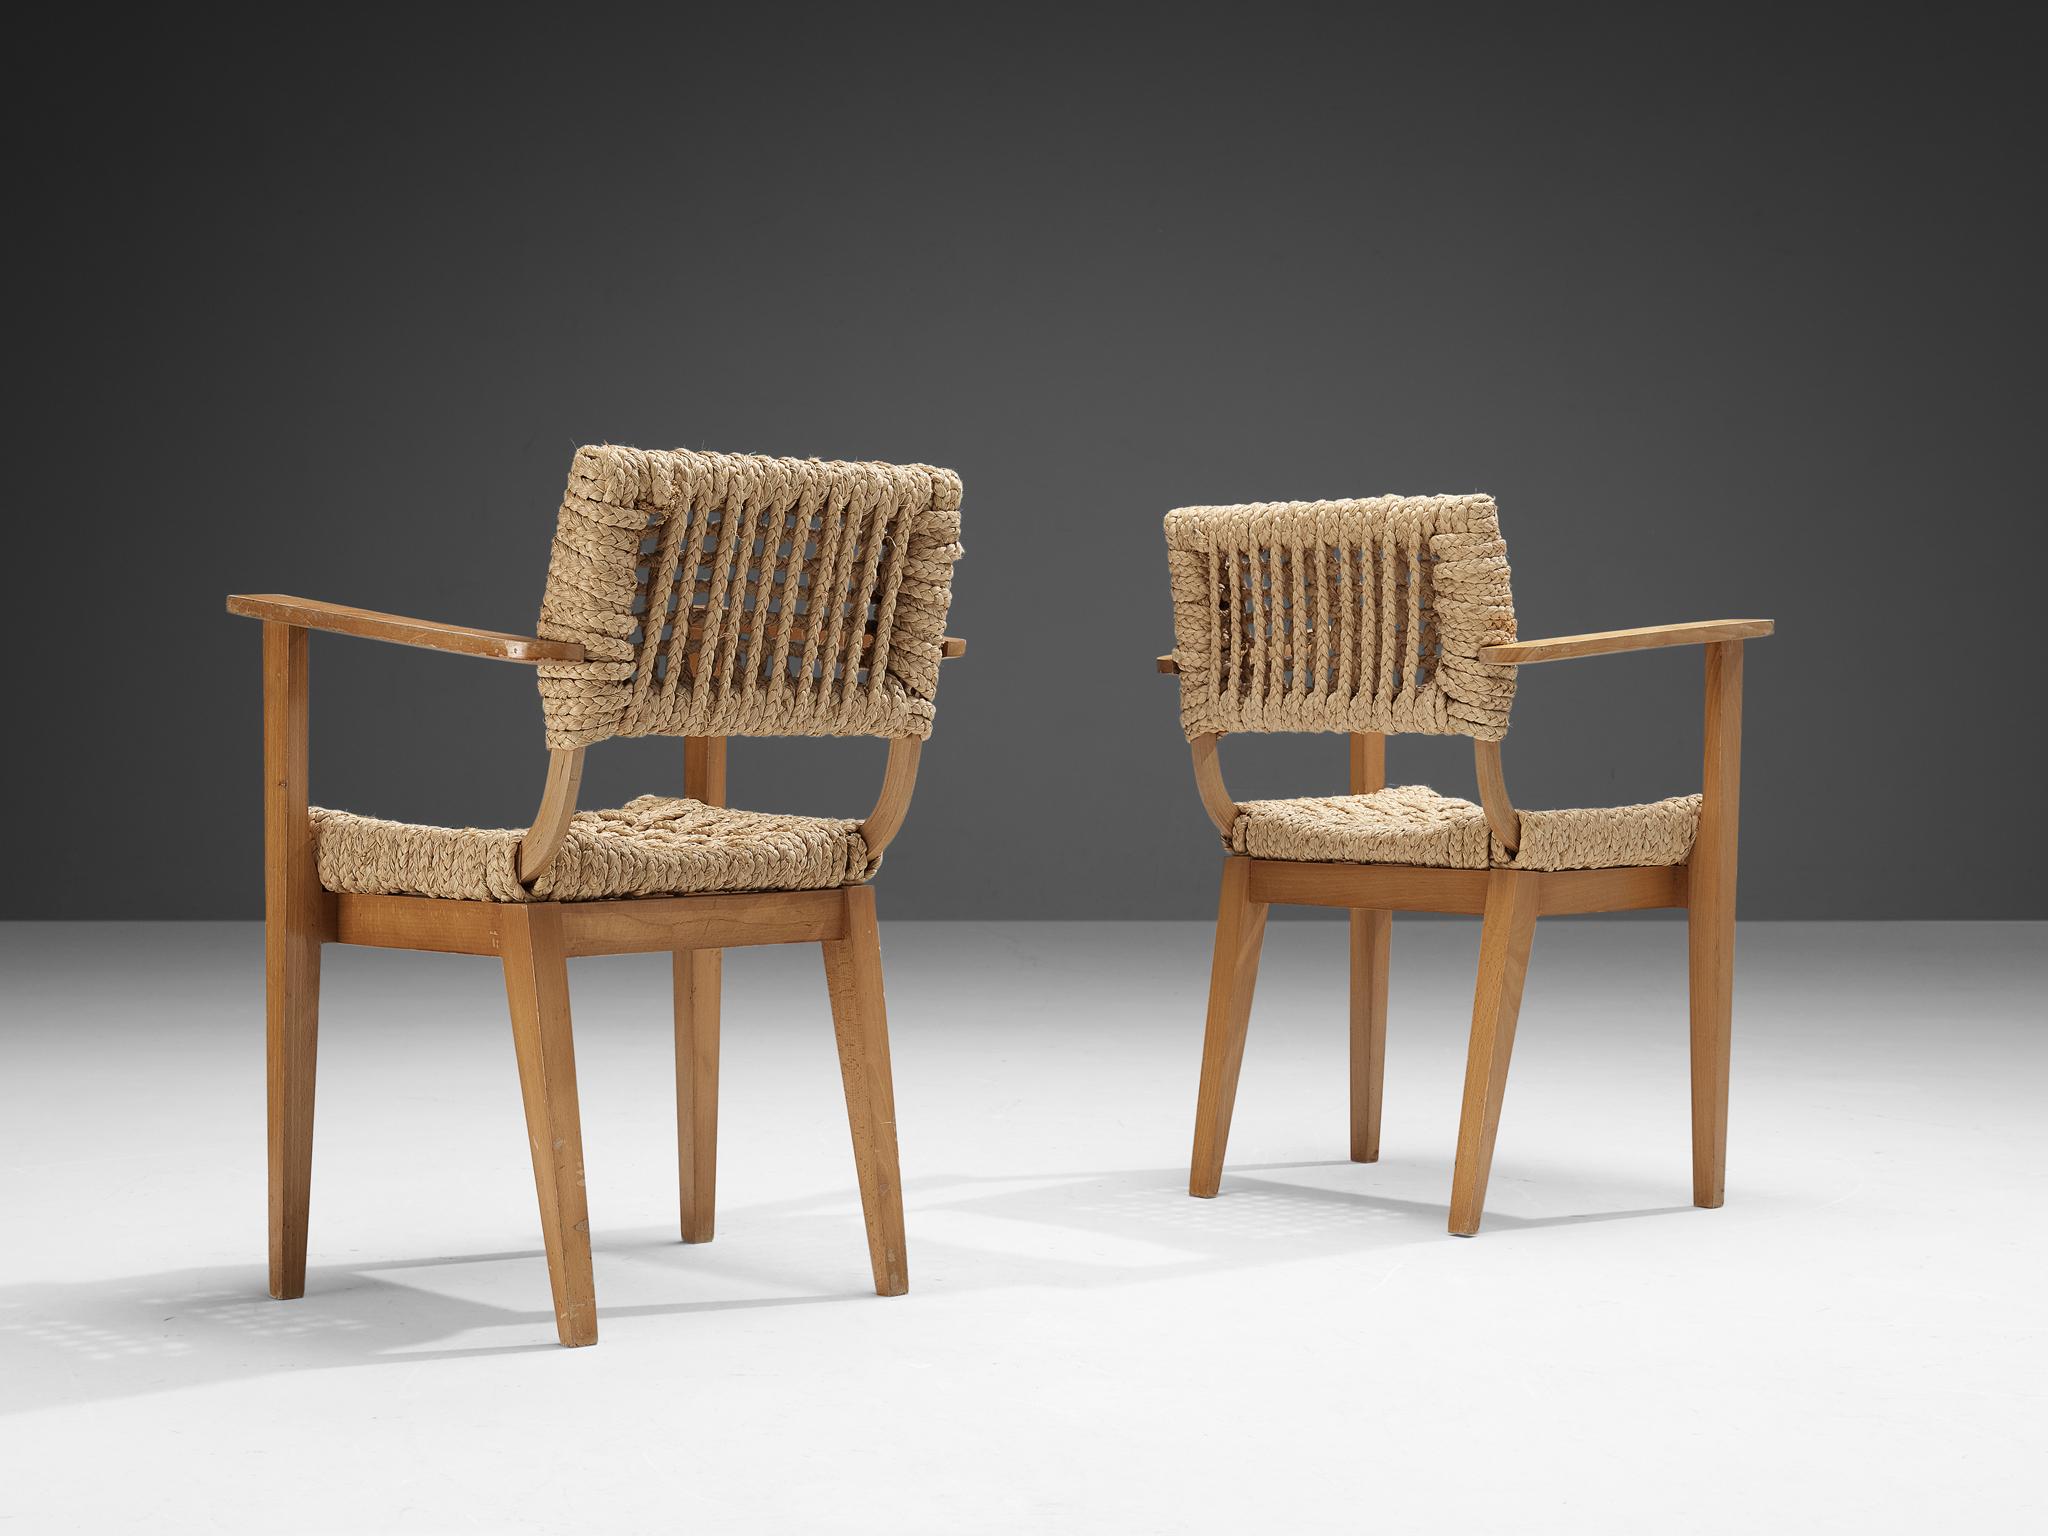 Adrien Audoux and Frida Minet for Vibo, pair of armchairs, beech, rope hemp, France, late 1940s.

Pair of naturalistic dining chairs designed by Adrien Audoux and Frida Minet. The seating and backrest are made of woven hemp from the abaca plant